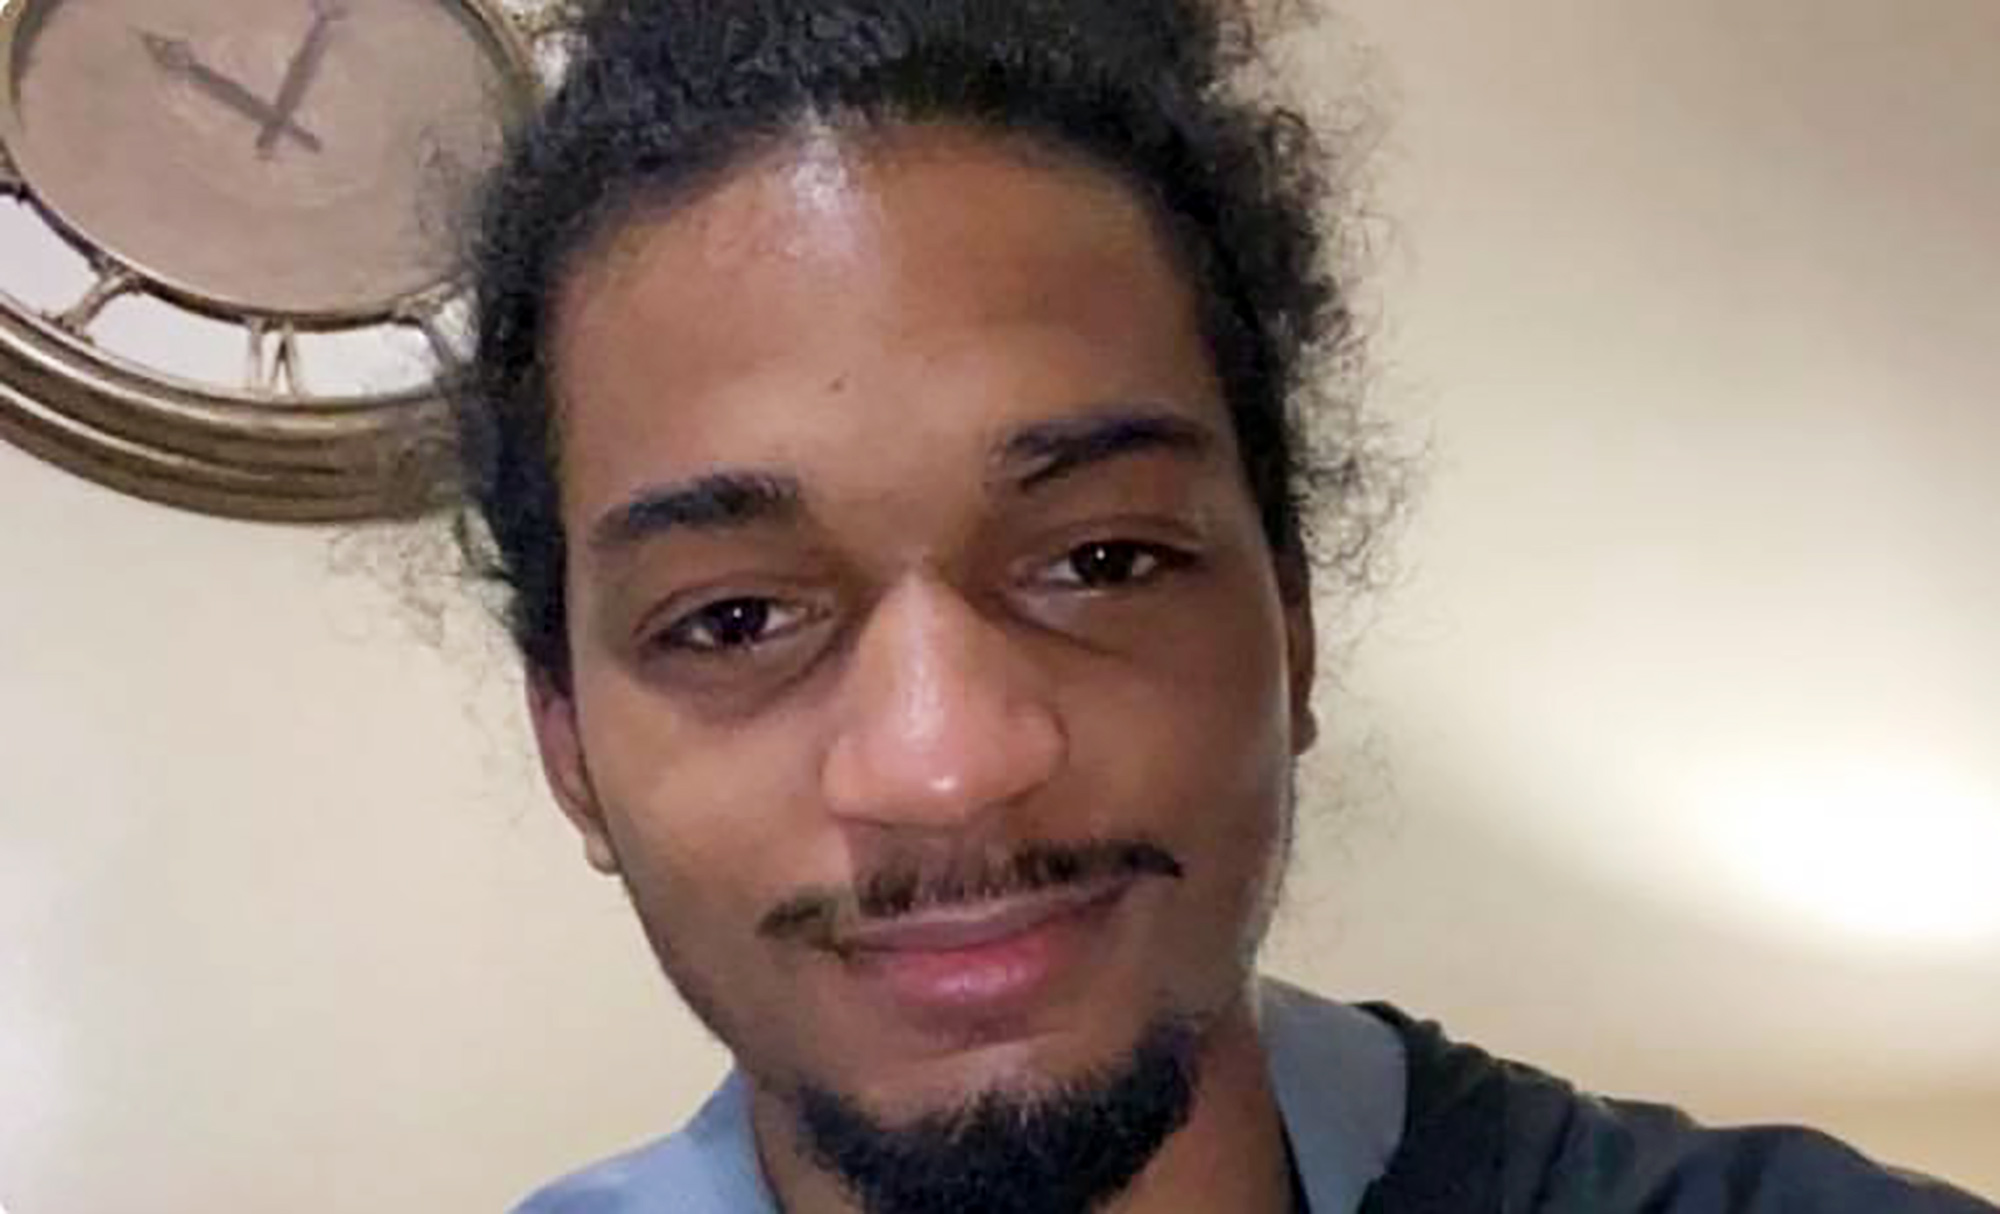 PHOTO: Casey Goodson, 23, of Columbus, Ohio, pictured in an undated handout photo, was shot and killed by a Franklin County Sheriff's deputy on Dec. 4, 2020.